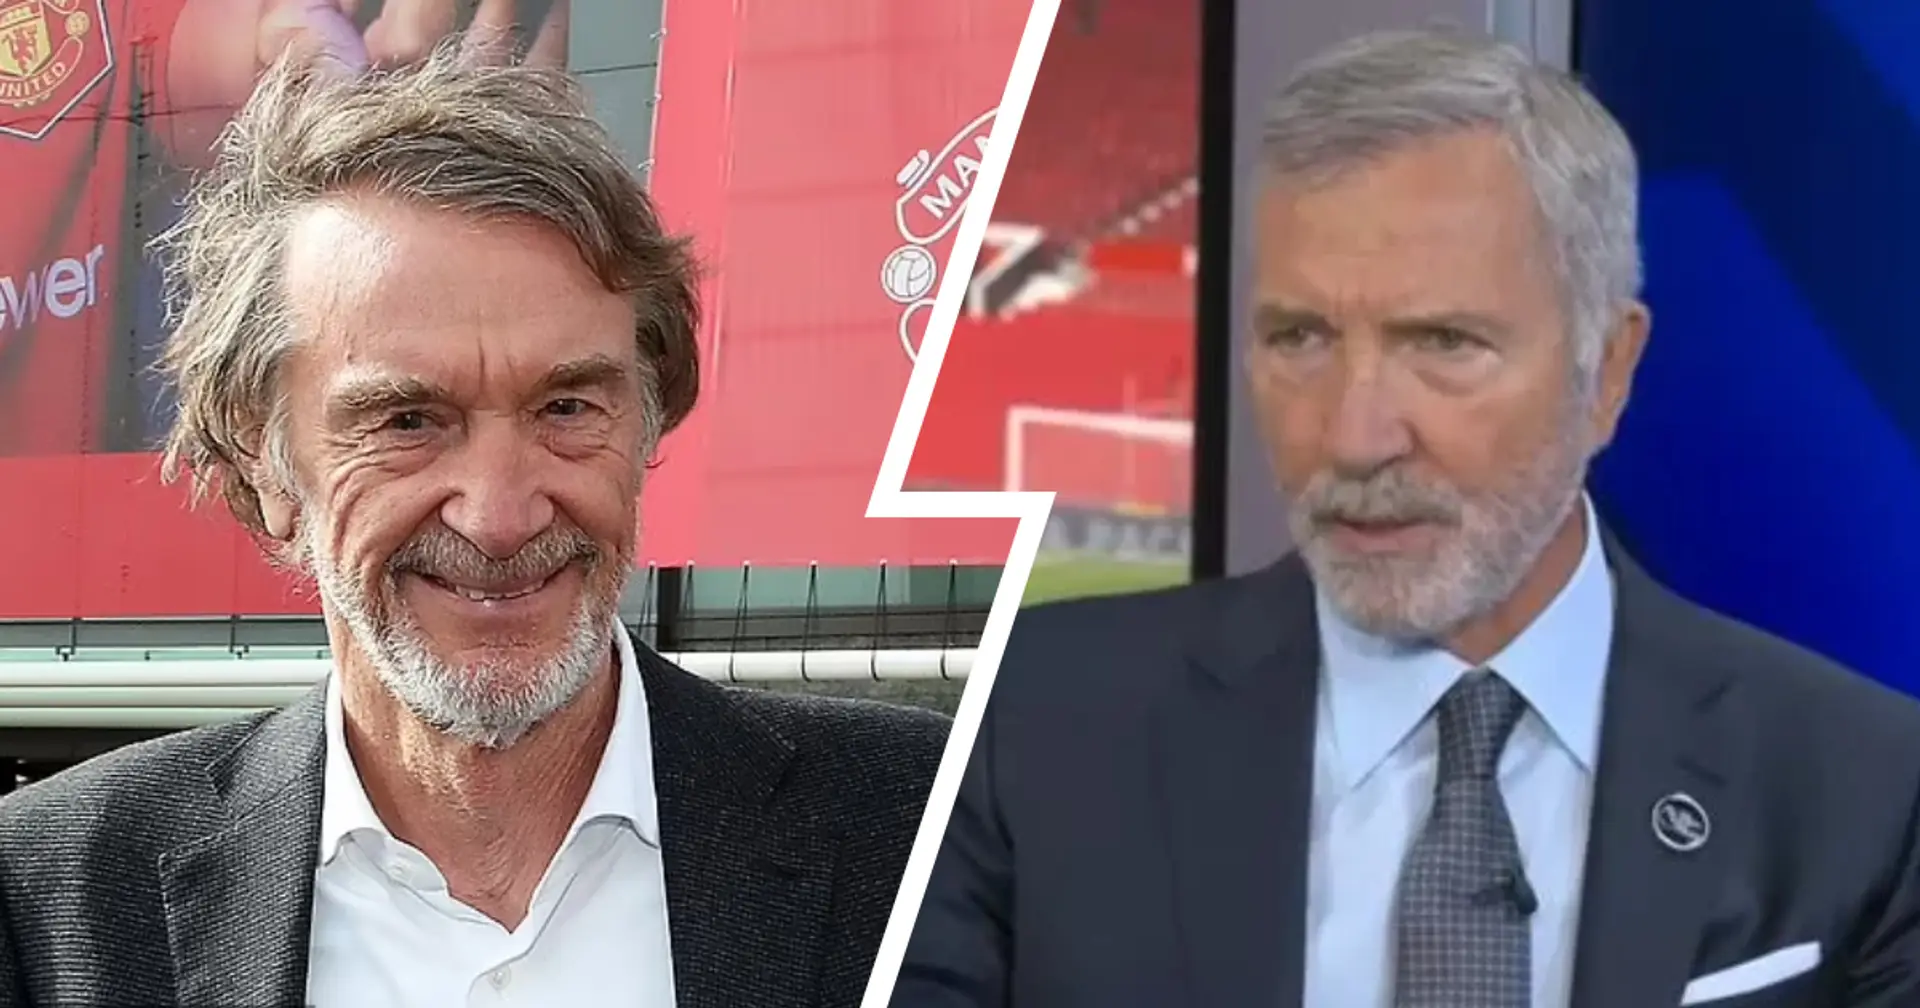 'There are no new ways of playing football': Graeme Souness names one thing Sir Jim Ratcliffe should address firsthand